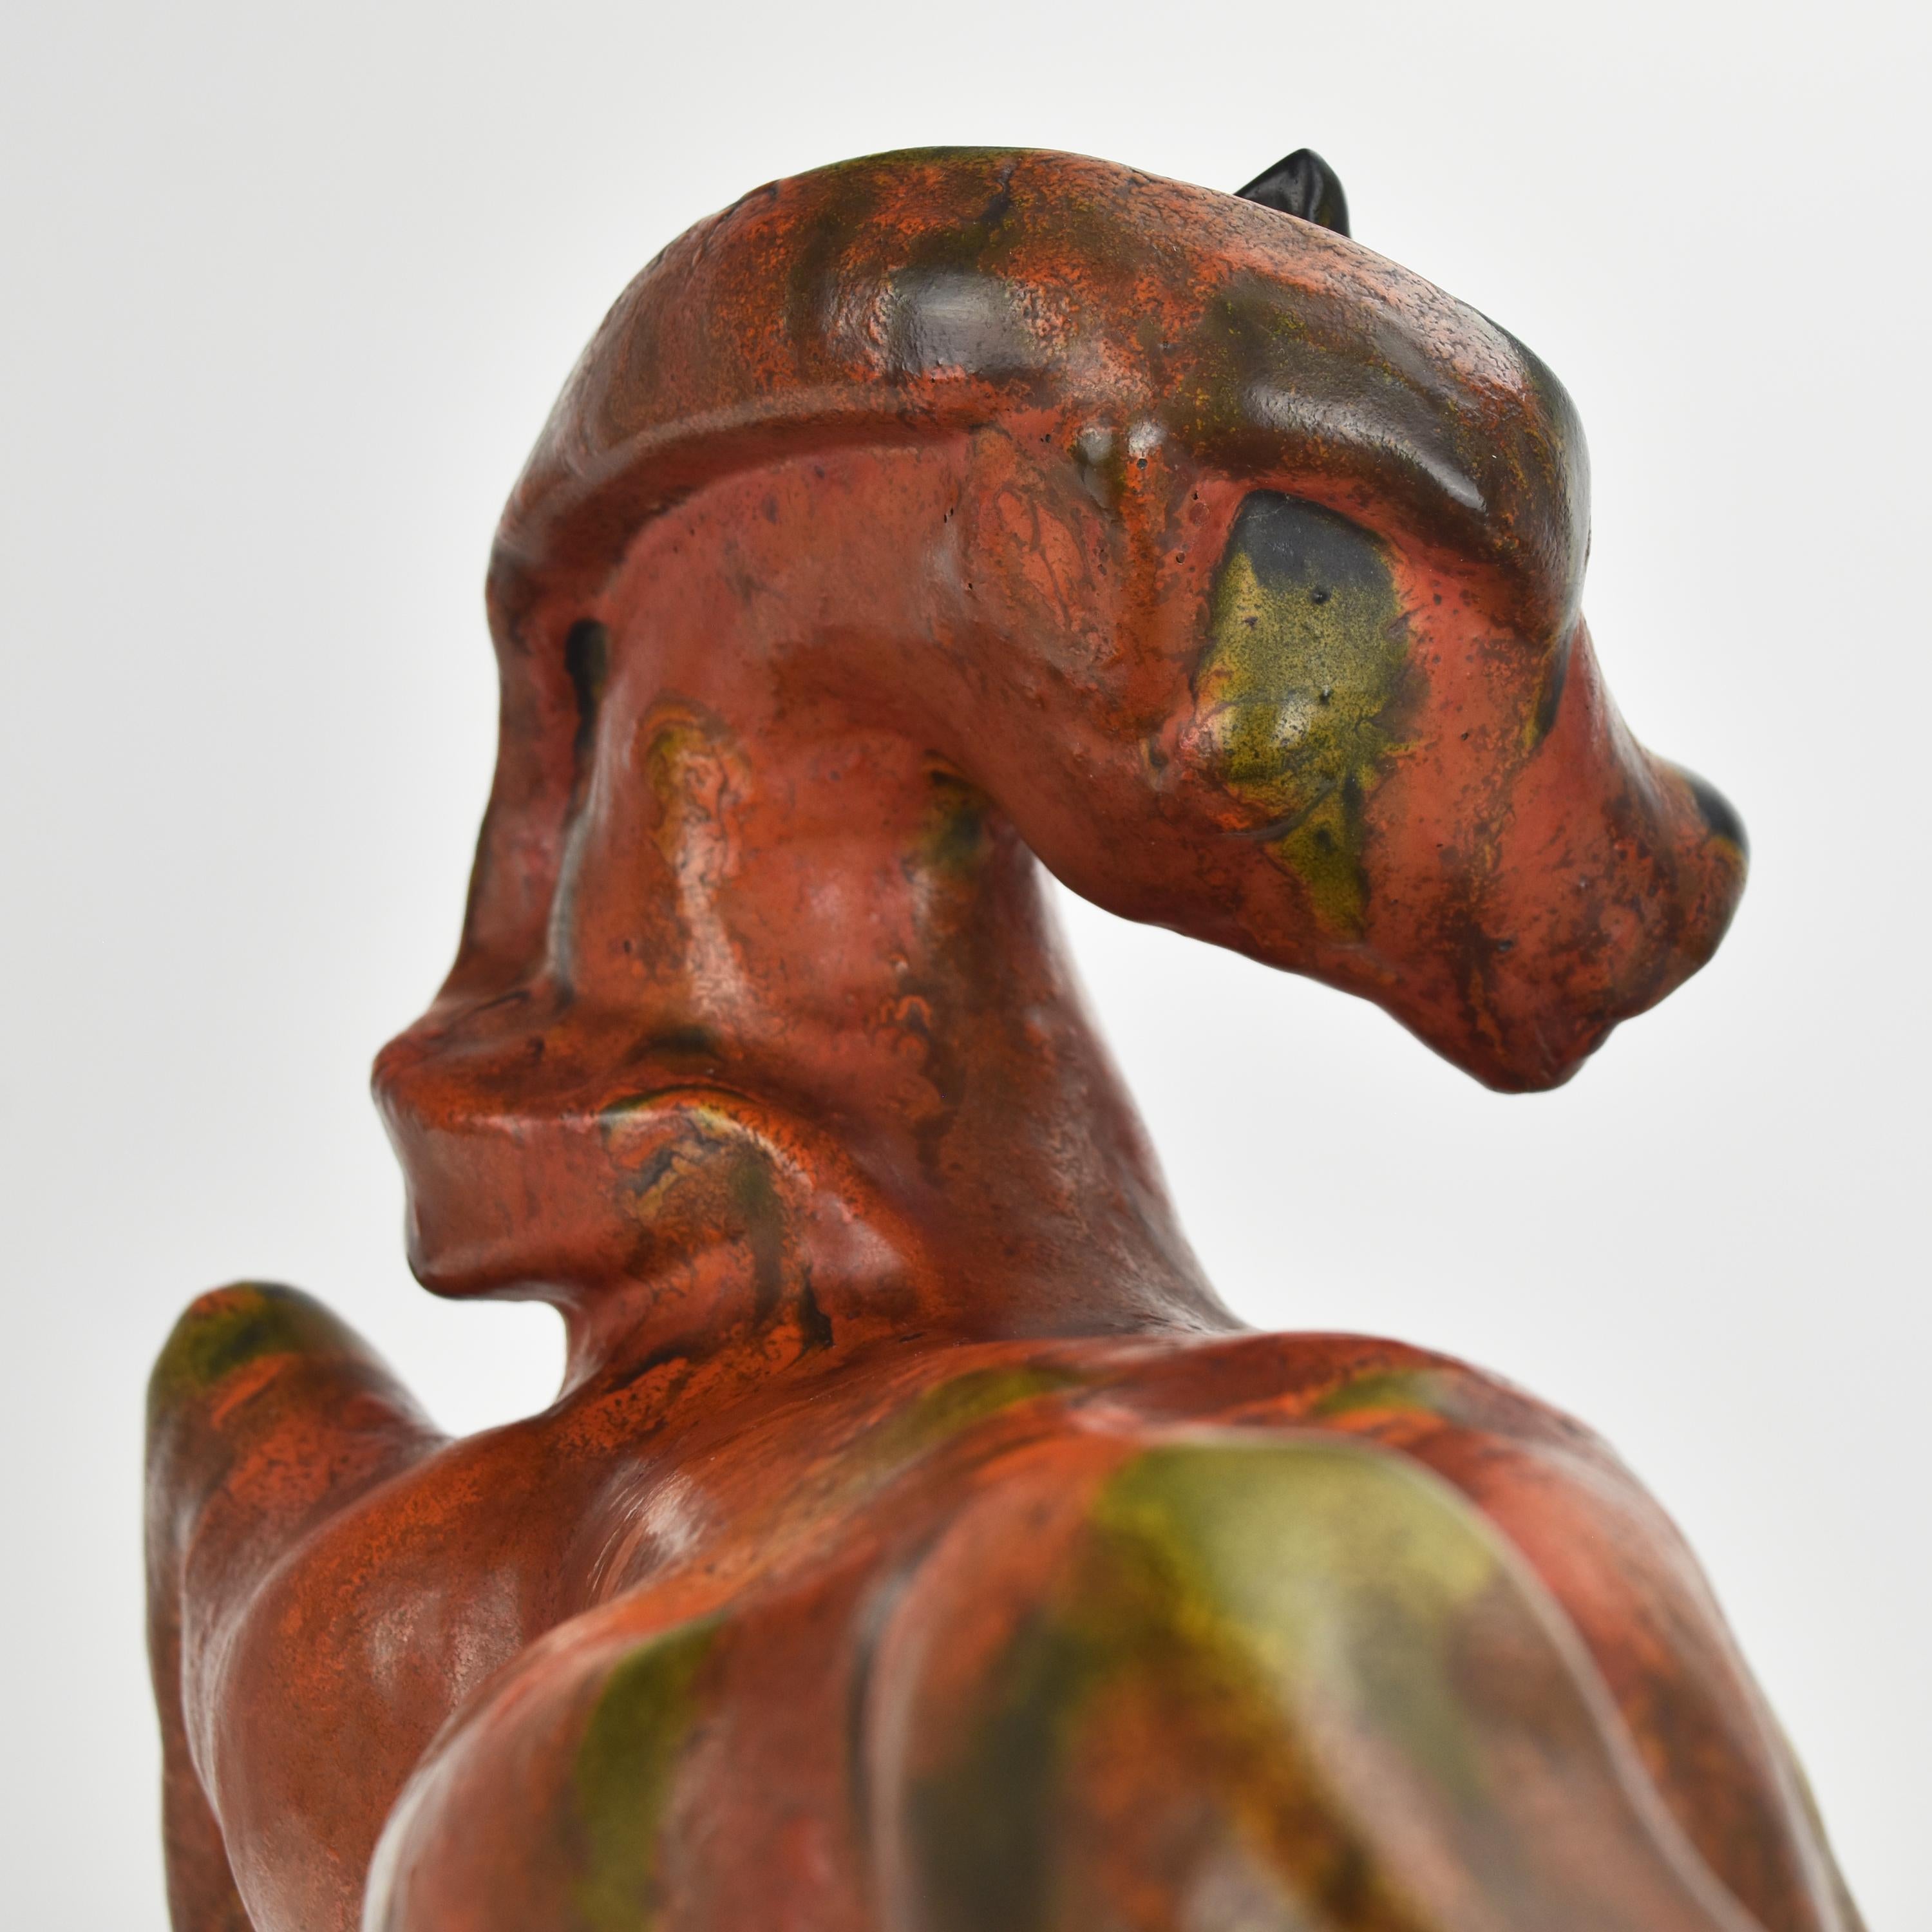 An outstanding Art Deco ceramic horse sculpture inspired by the painting 